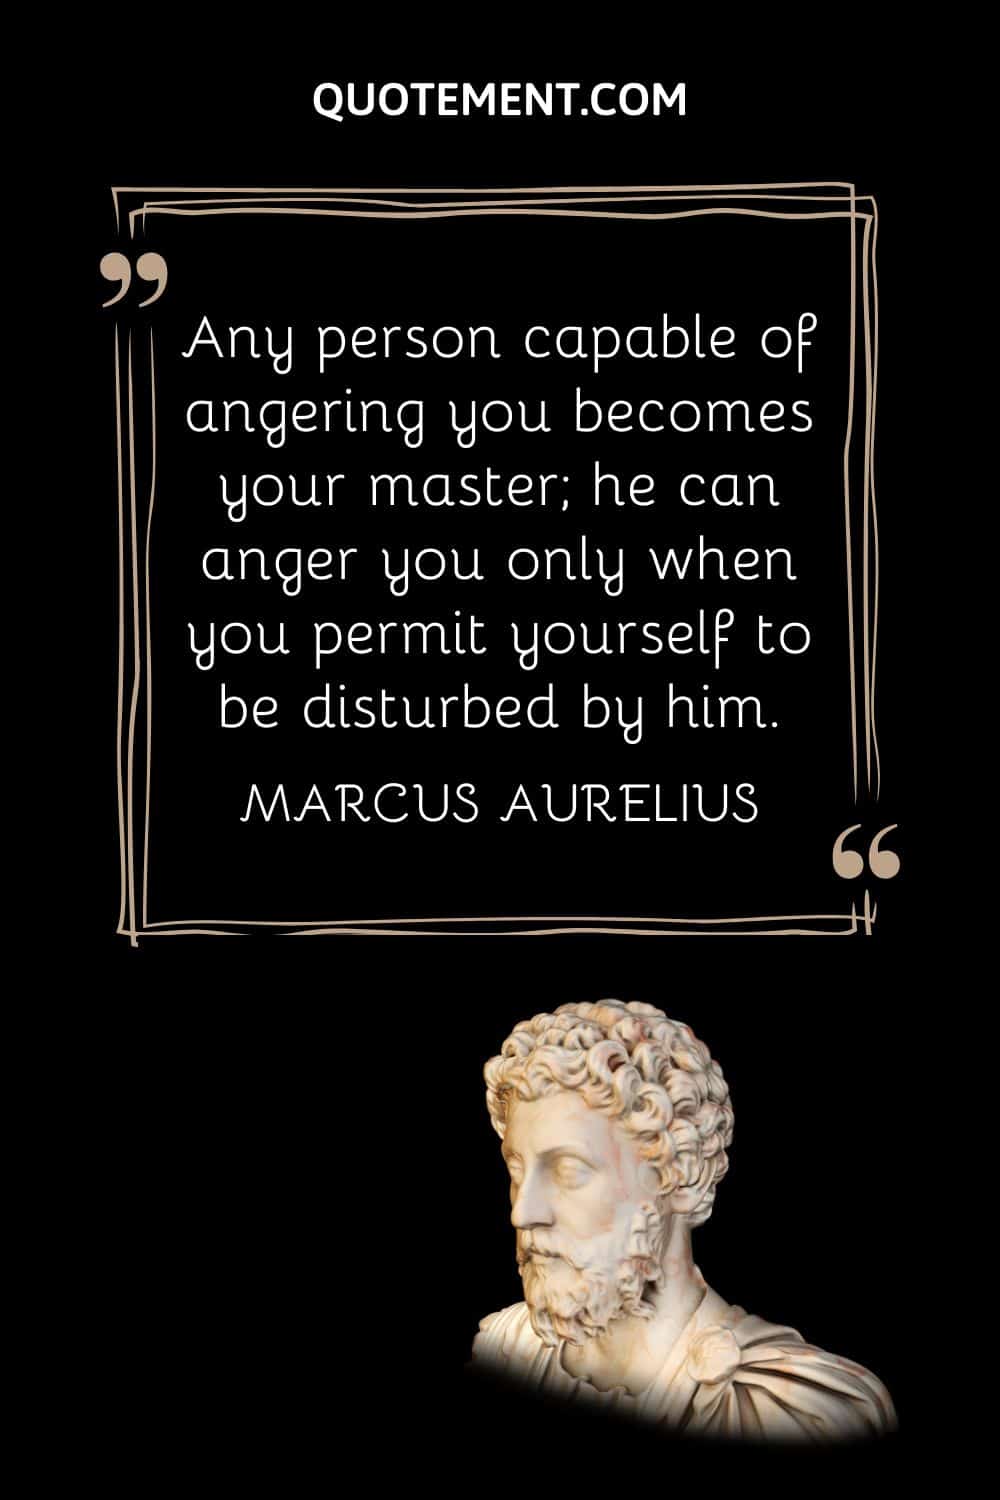 “Any person capable of angering you becomes your master; he can anger you only when you permit yourself to be disturbed by him.” — Marcus Aurelius